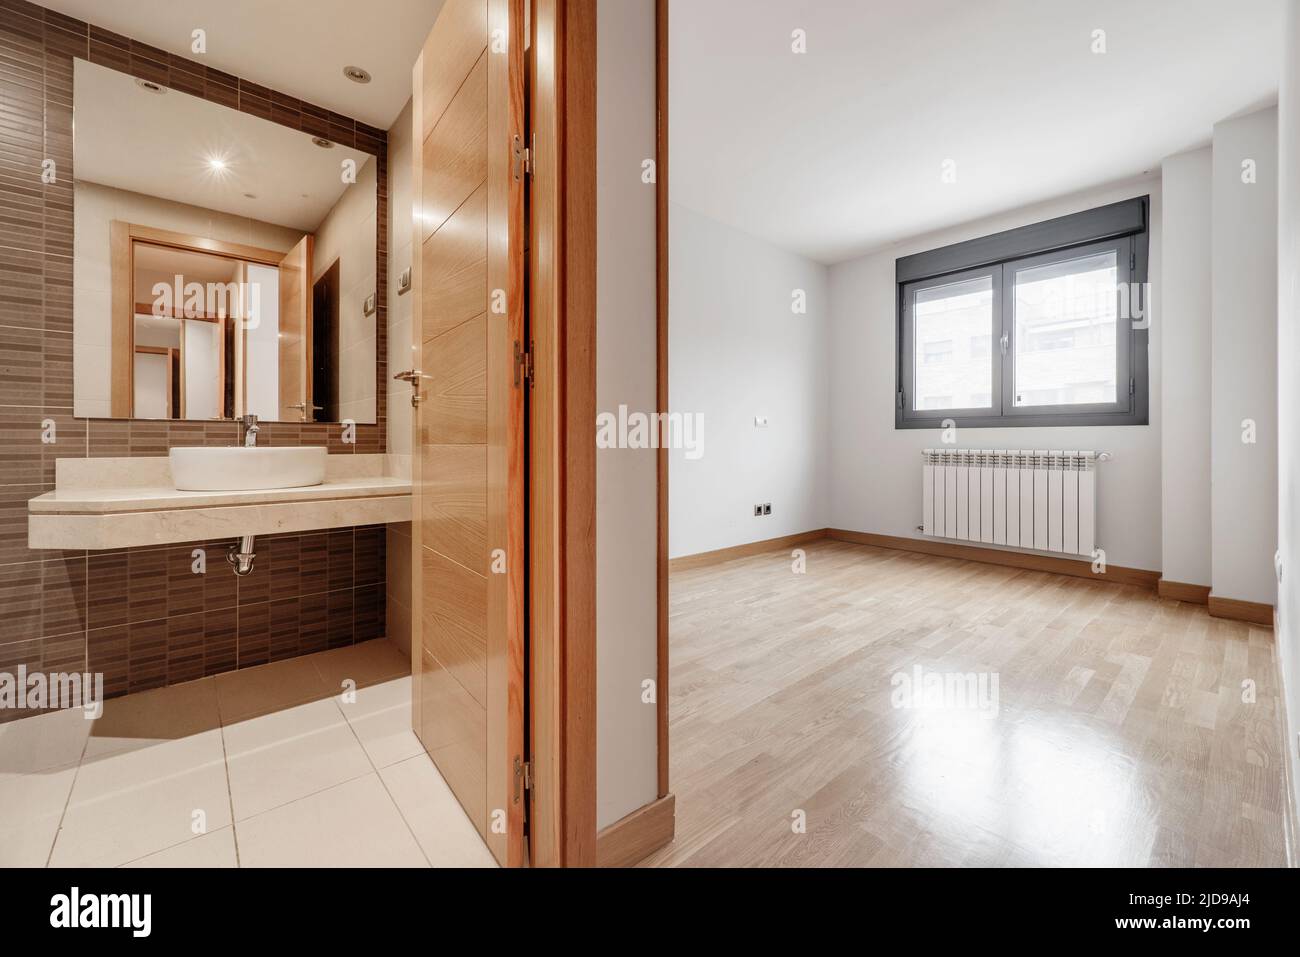 Empty room with aluminum window with views, French oak parquet flooring, en-suite bathroom with marble top and large white aluminum radiator Stock Photo